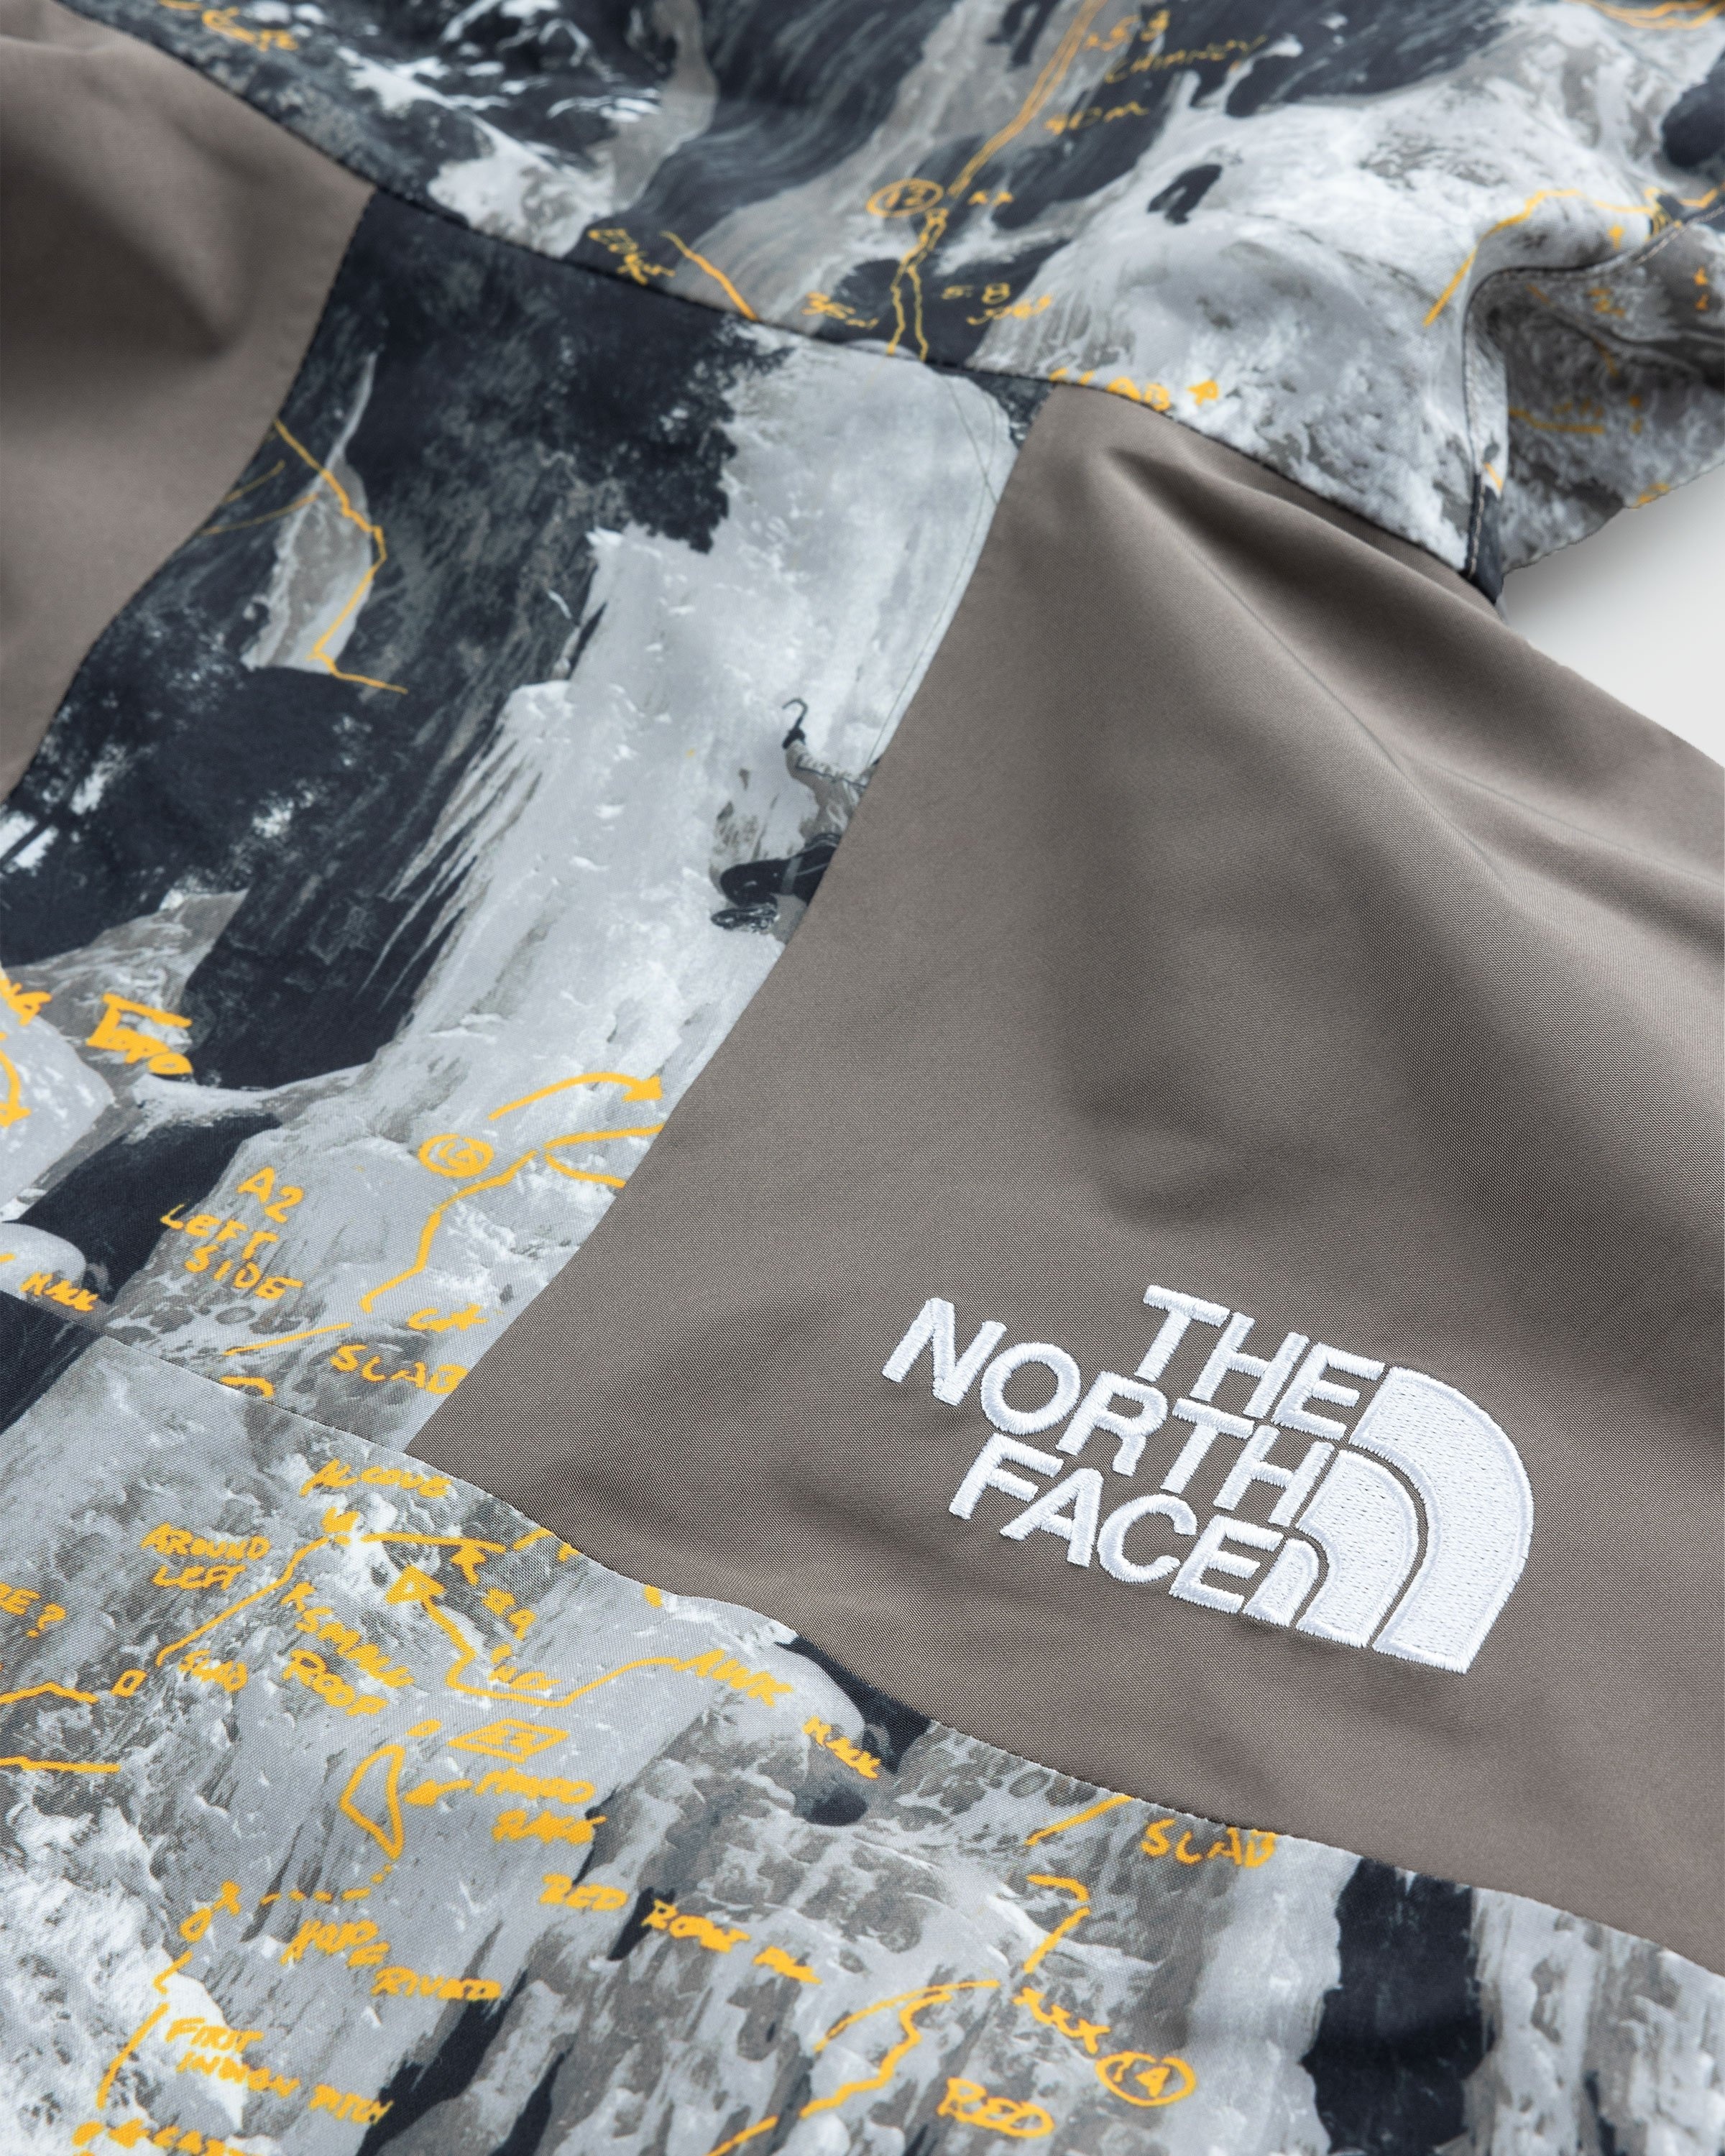 The North Face – GORE-TEX Mountain Jacket Falcon Brown Conrads Notes Print - Outerwear - Multi - Image 7